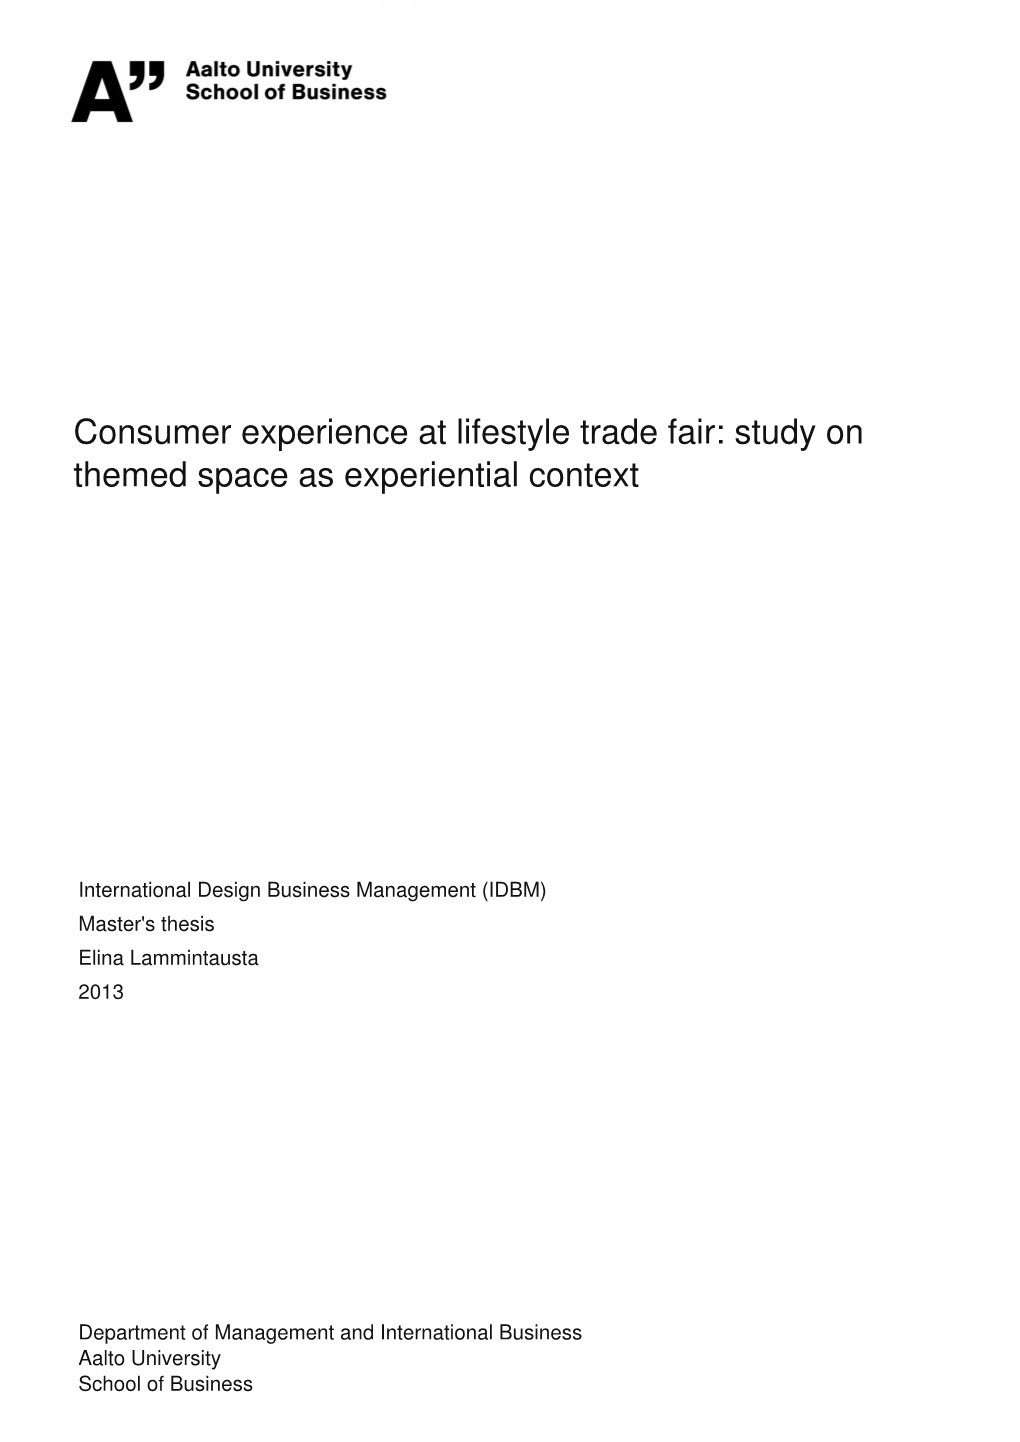 Consumer Experience at Lifestyle Trade Fair: Study on Themed Space As Experiential Context